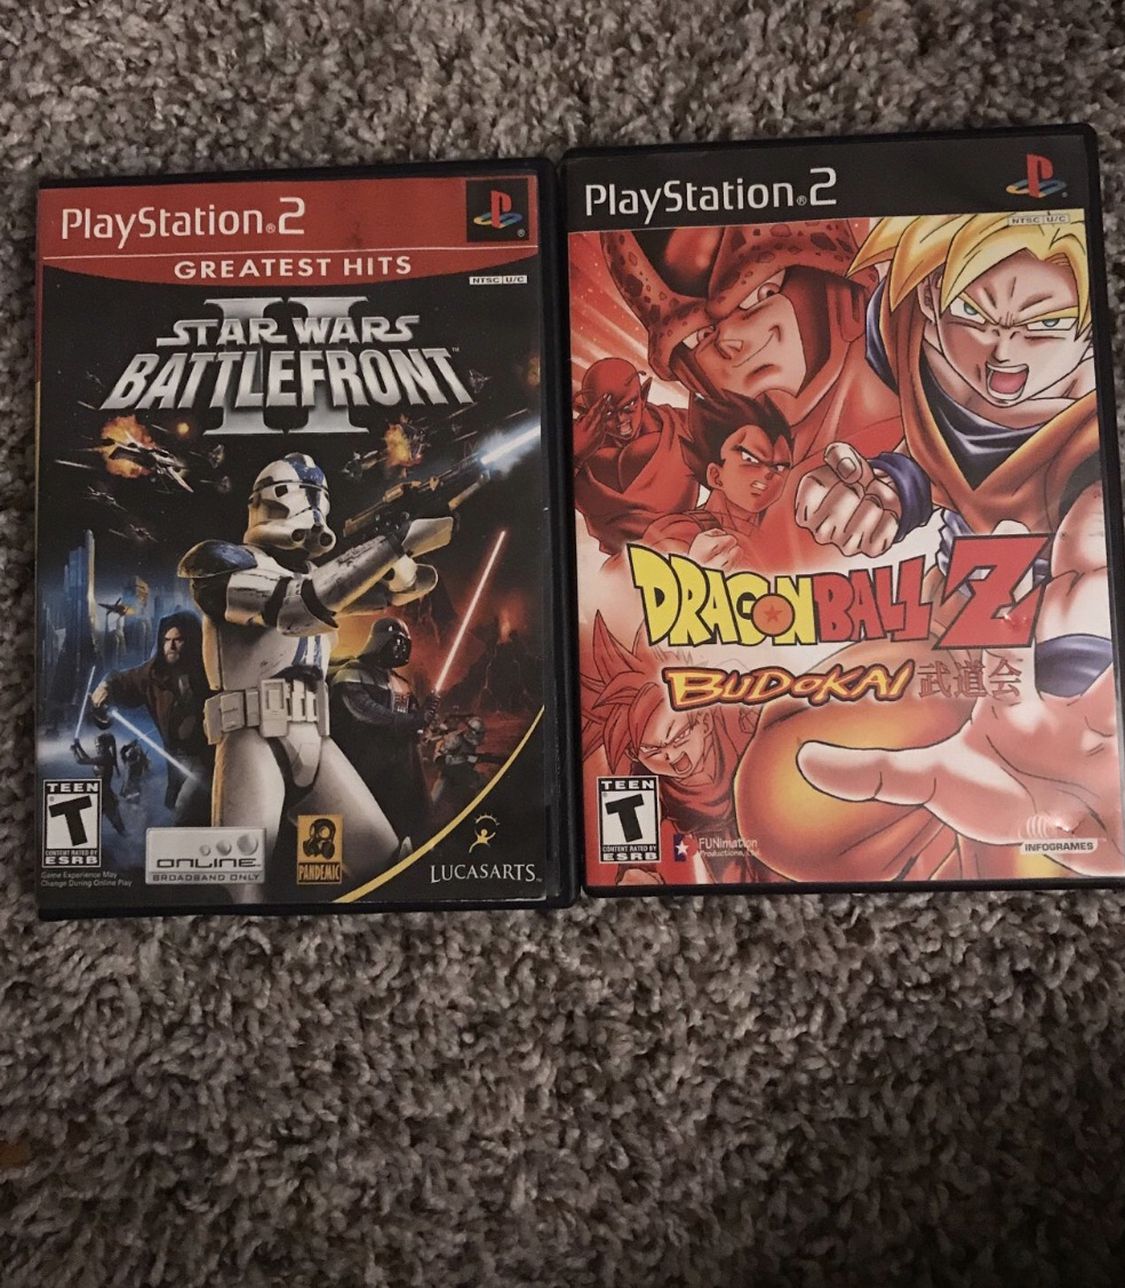 Dragon Ball budokai and star wars battlefront 2 for ps2 Playstation 2 Tested